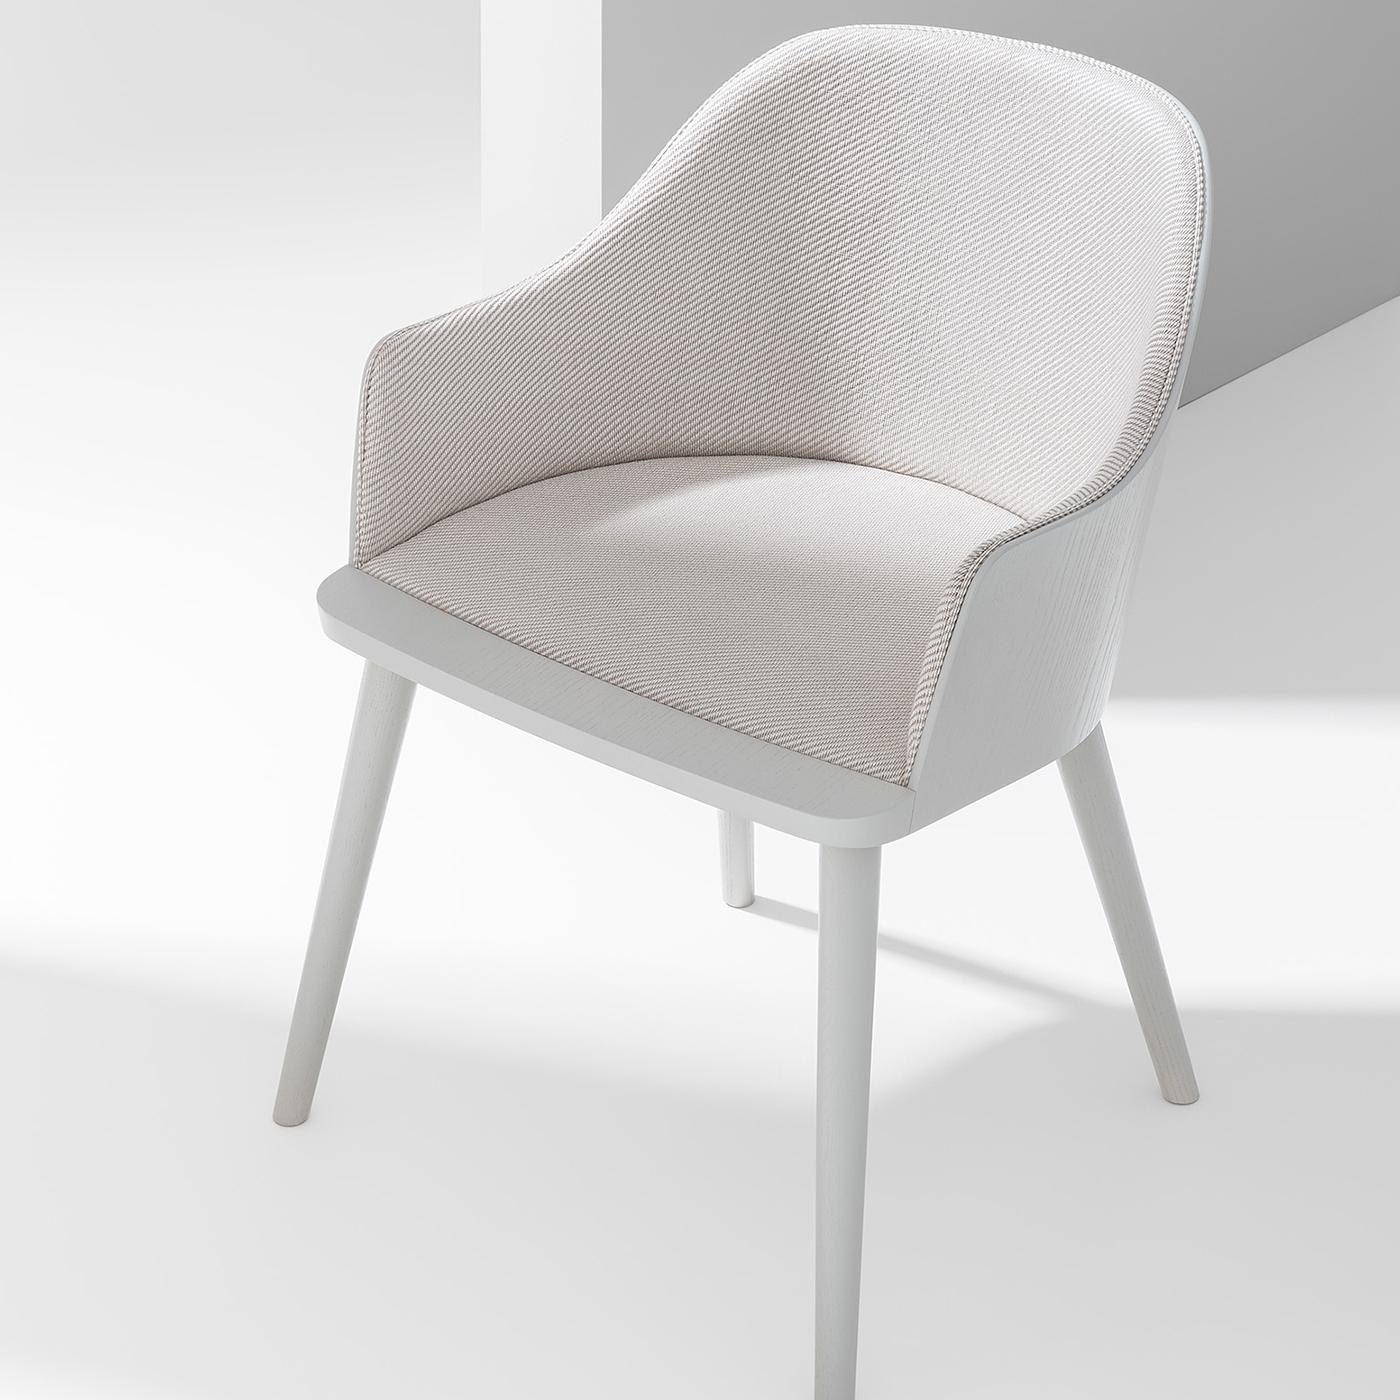 Elegant and refined, this chair is an ergonomic design by Victor Carrasco. Inspired by the classic silhouette of a shell chair, it features a large seat with curved back and embracing armrests, and rests on four slanted legs enriched with